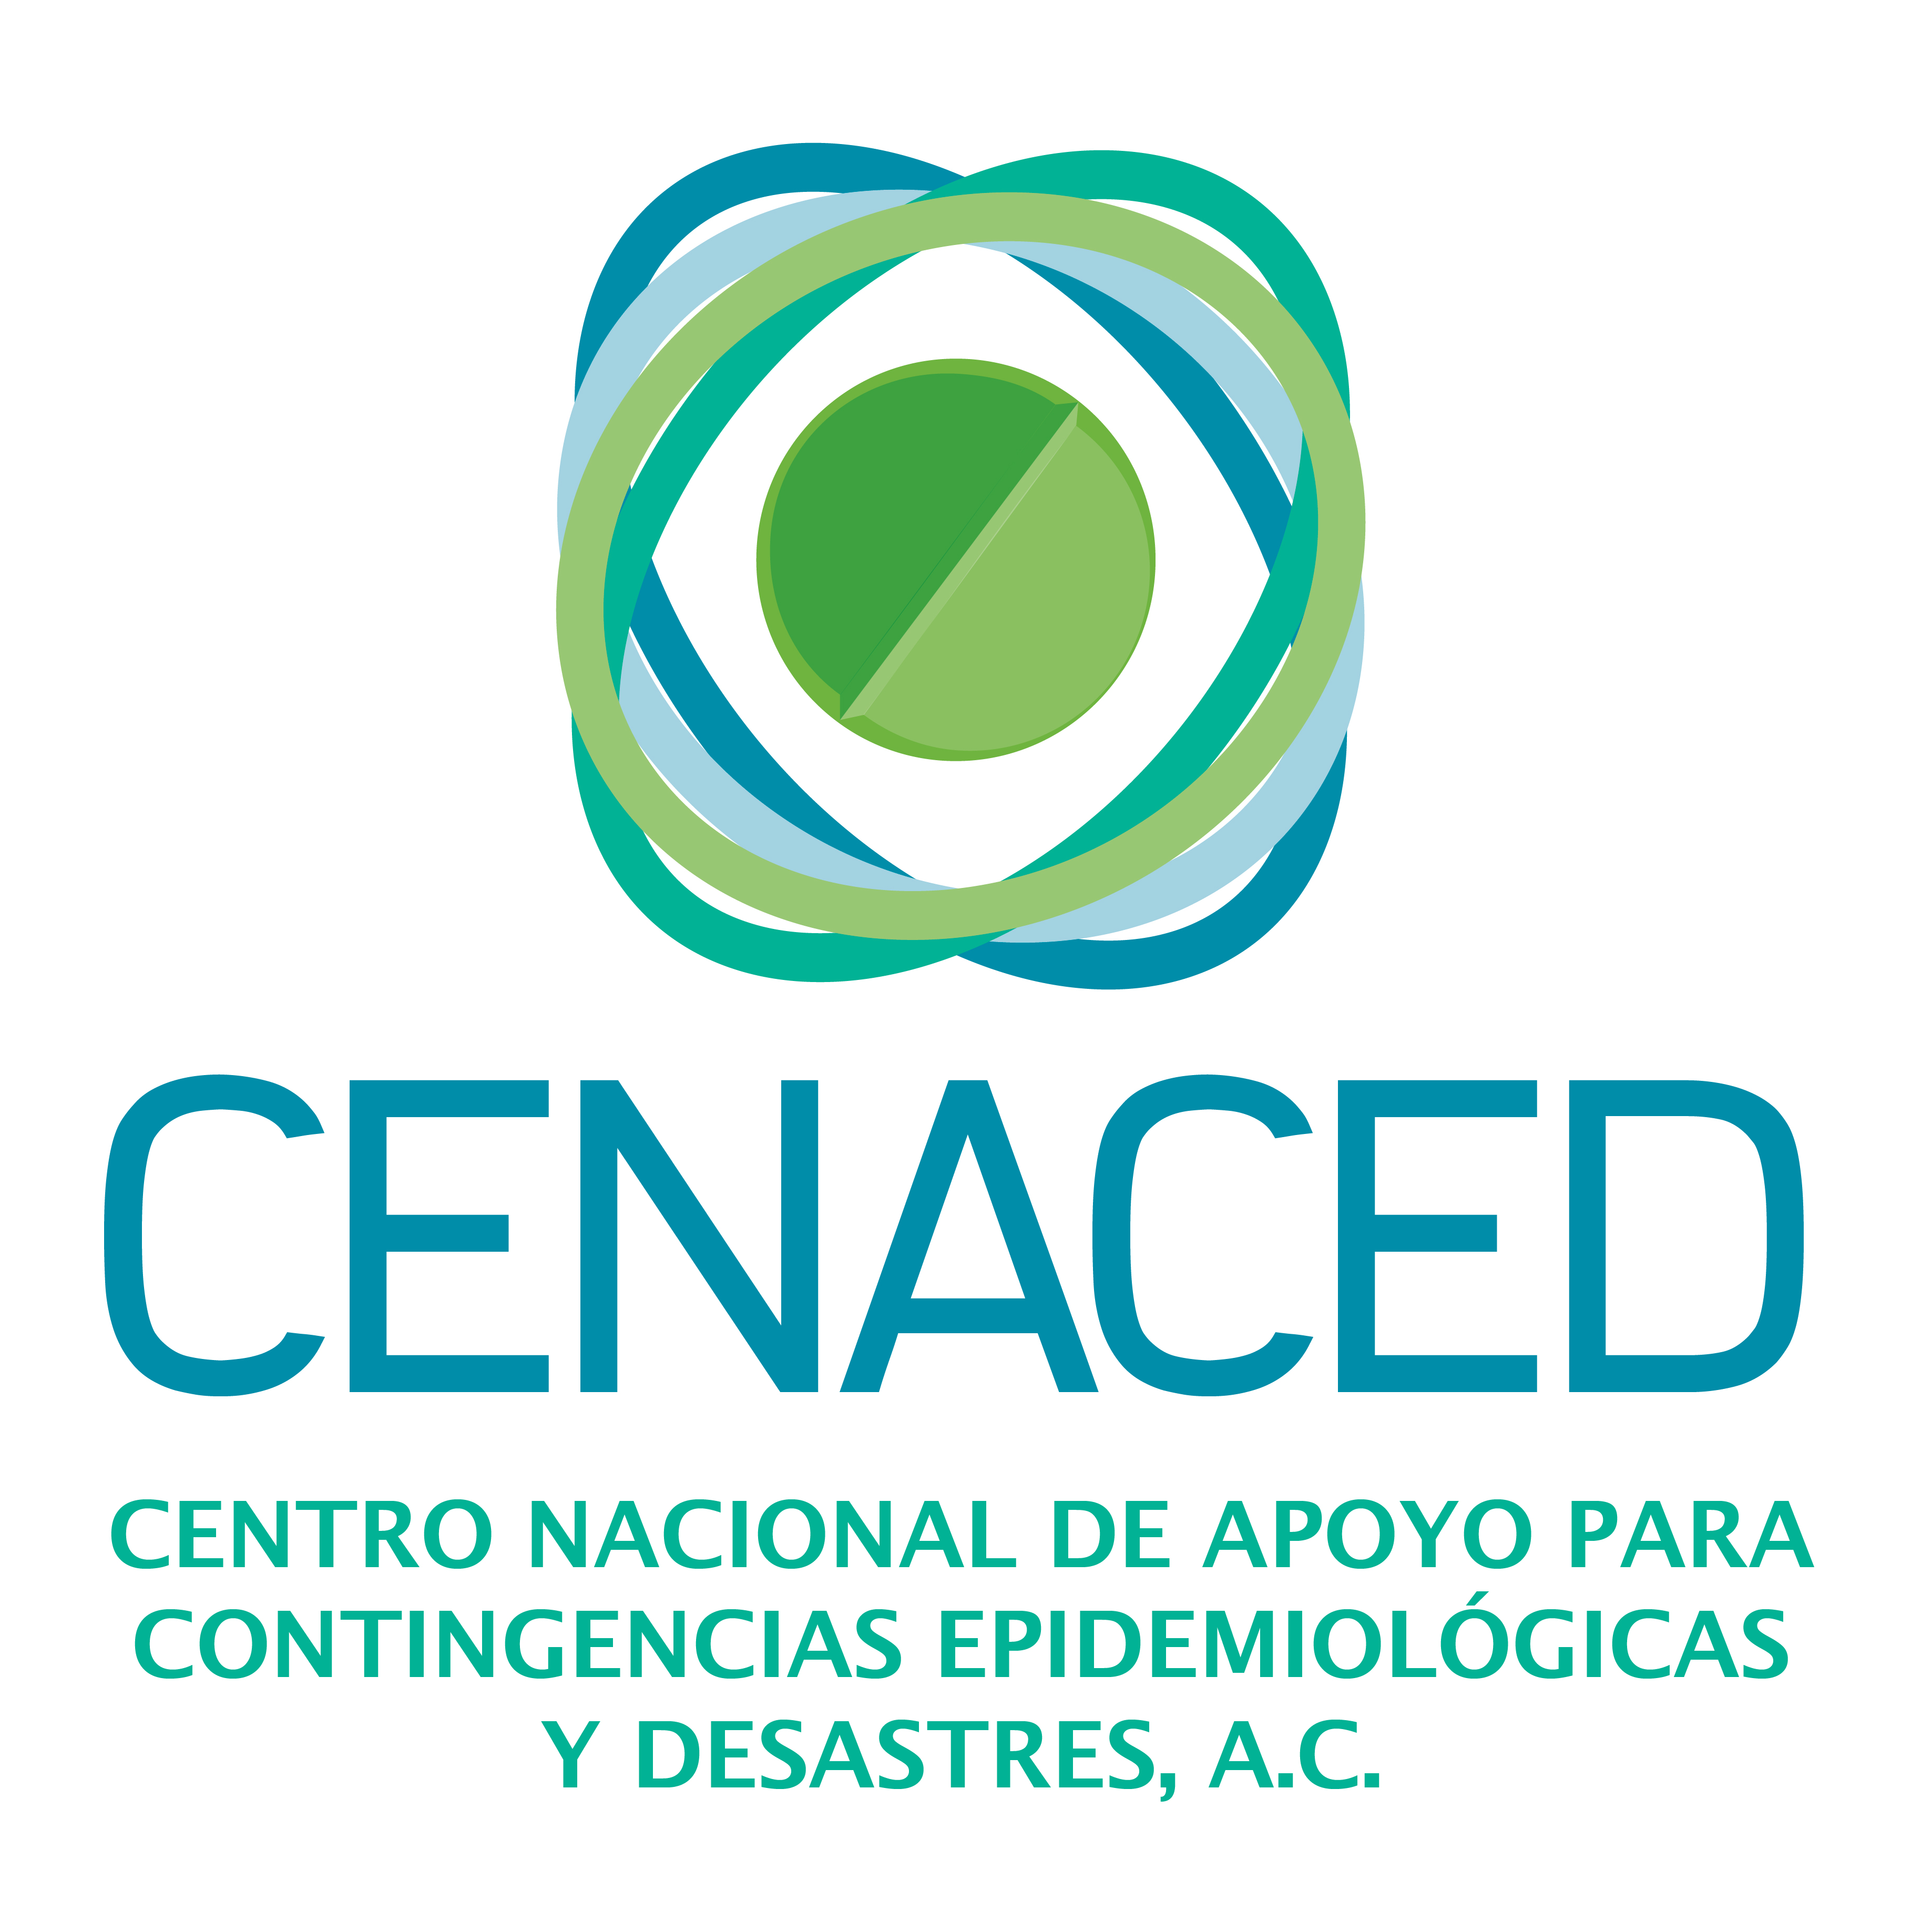 CENACED A.C. Mexico - National Support Center for Epidemiological Contingencies & Disasters